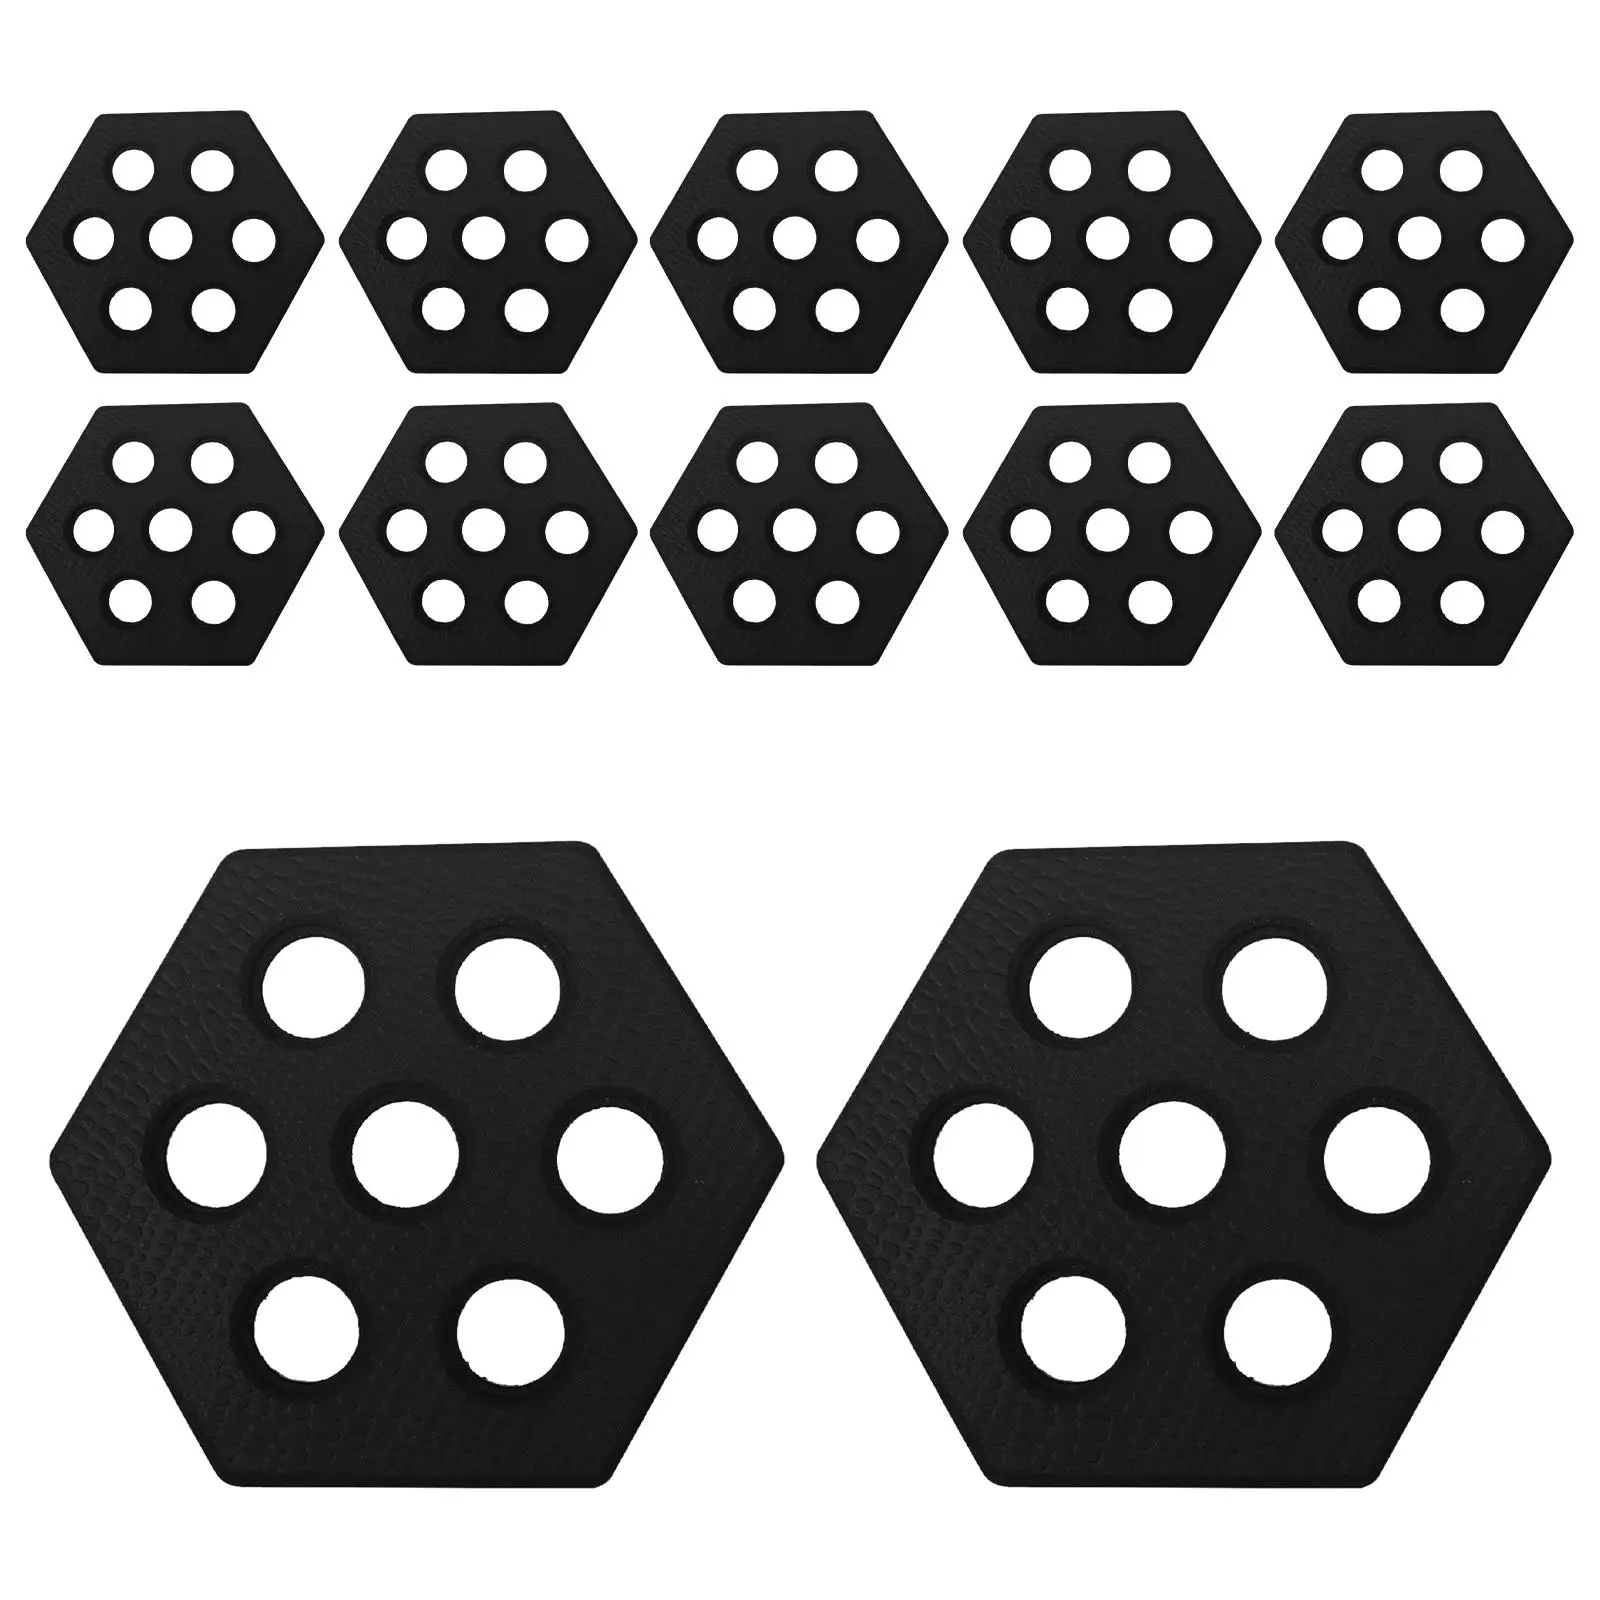 12 X Hexagon Surfboard Traction Pads, Waxless Decking Accessories, Professional Surfpad Deck Grip Pads for Longboard